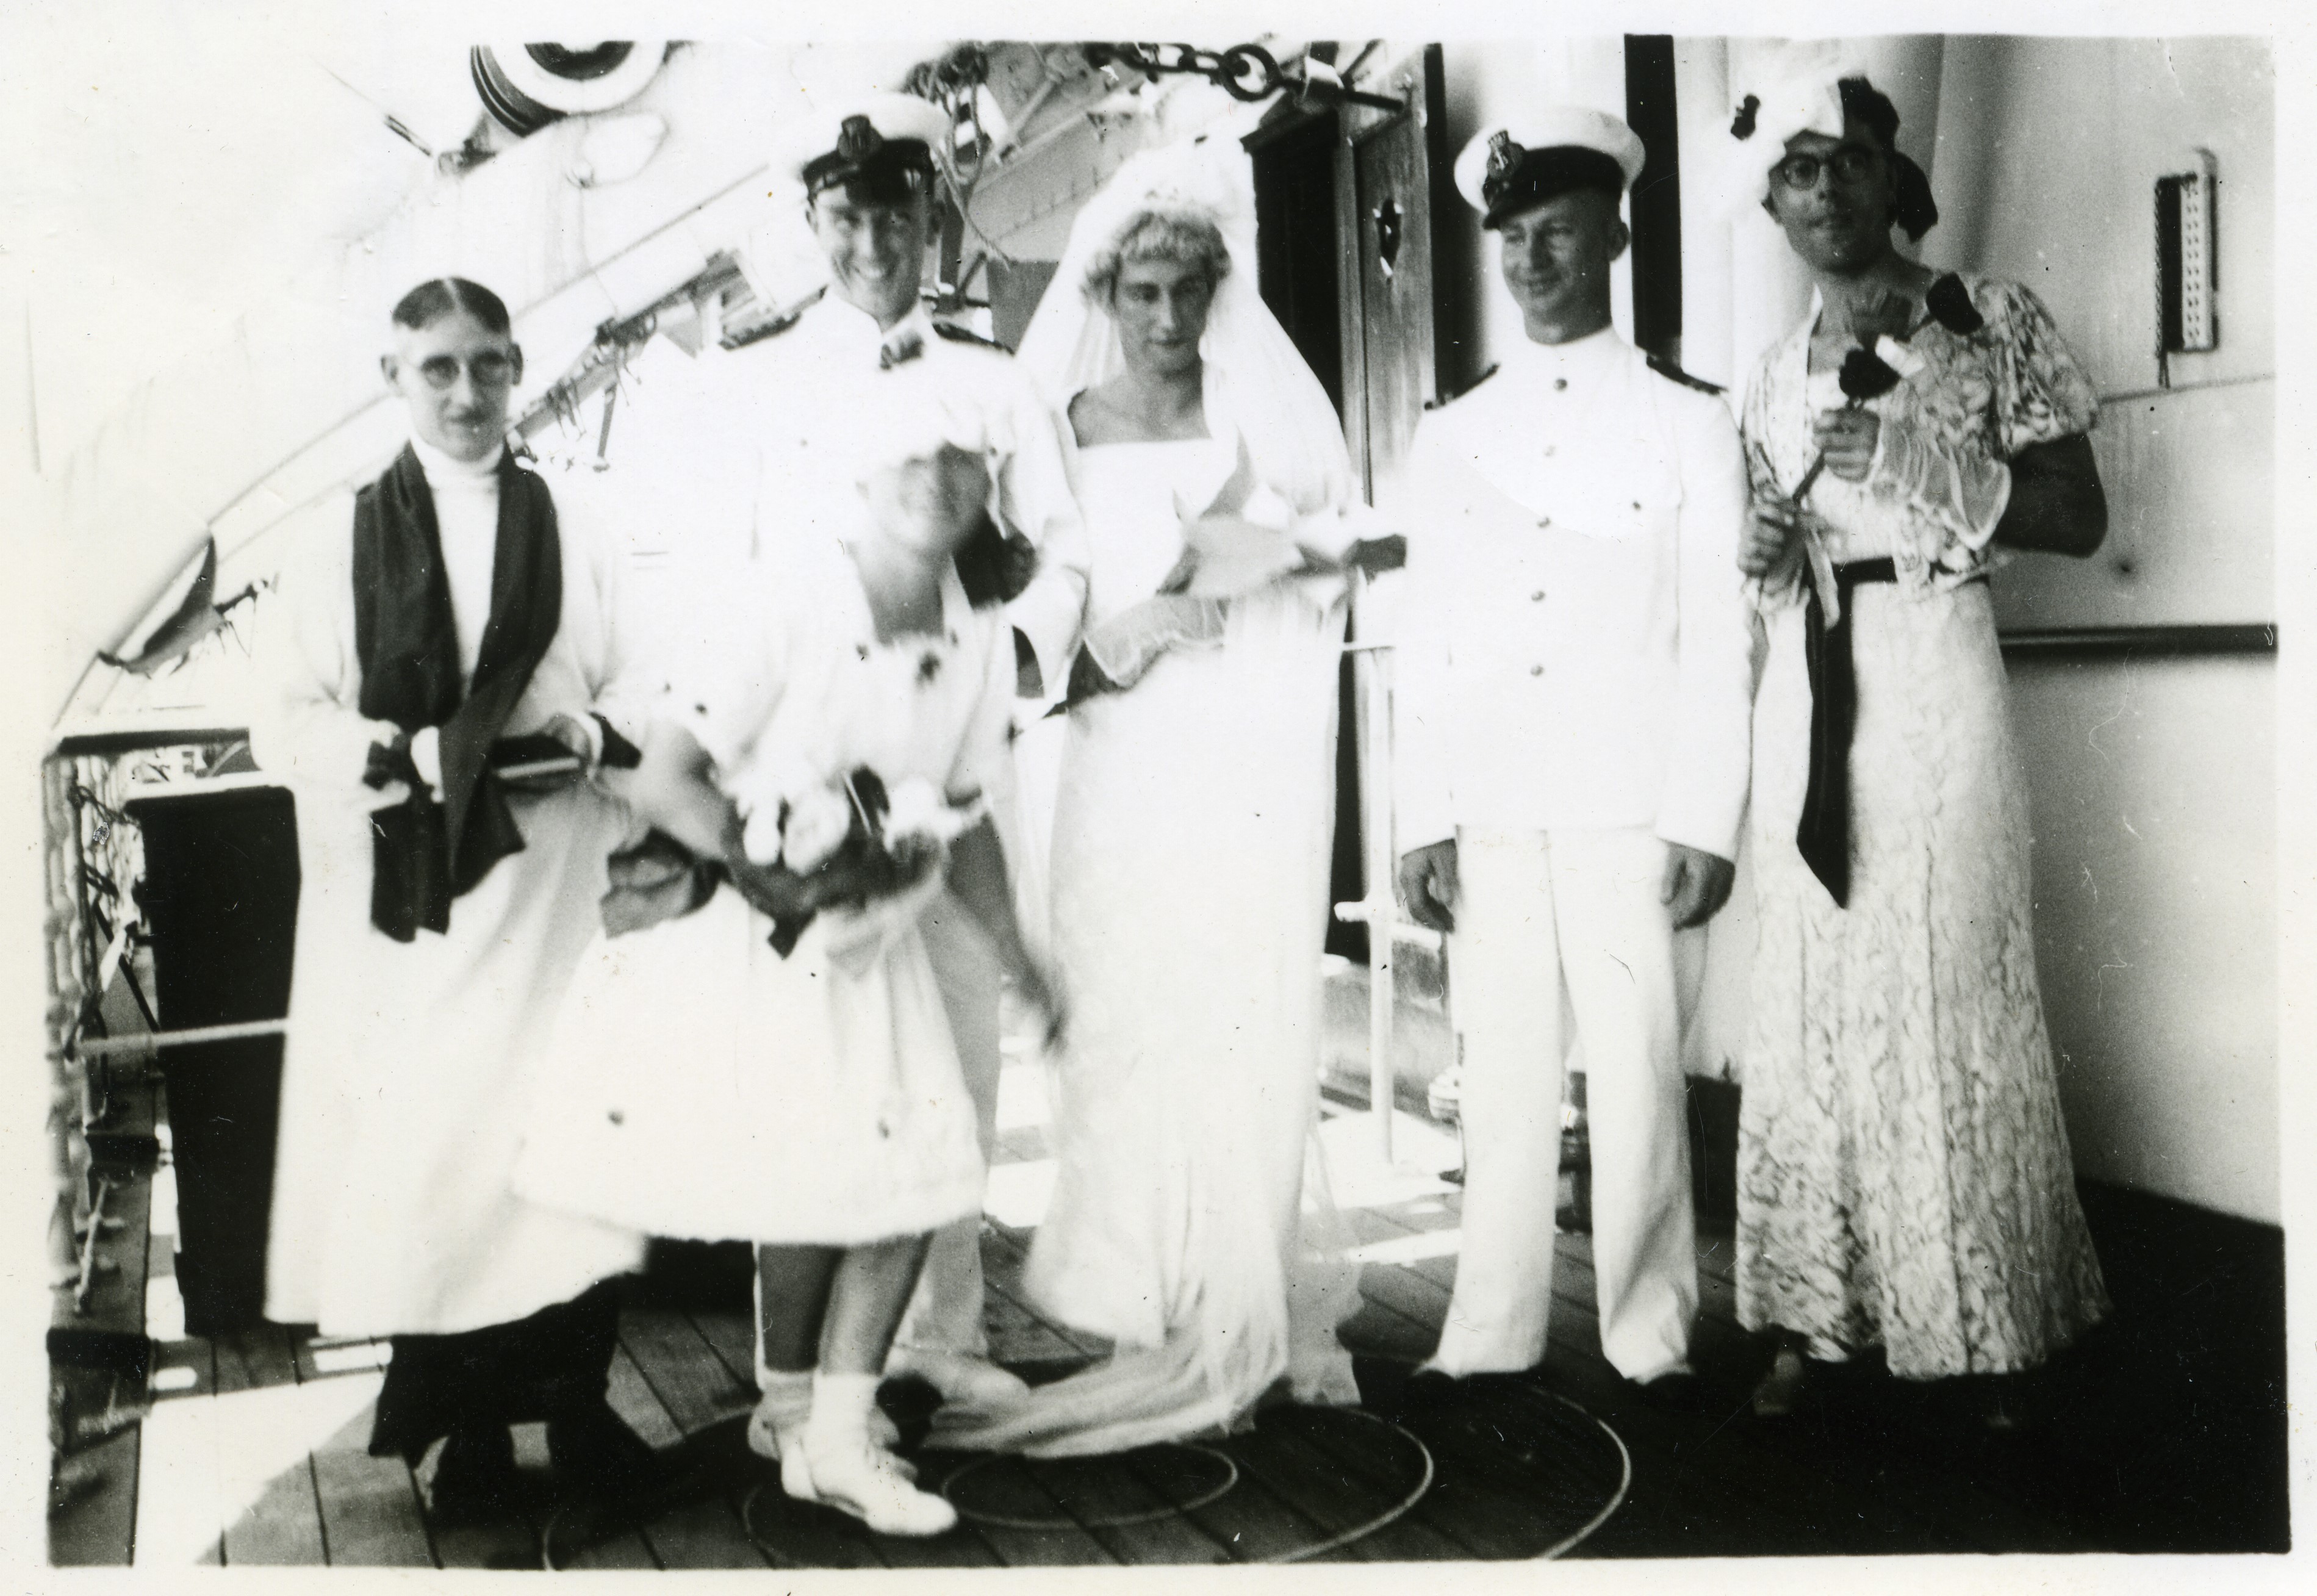 Six men on the deck of a ship dressed as a wedding party including pastor, bridesmaids and bride. 